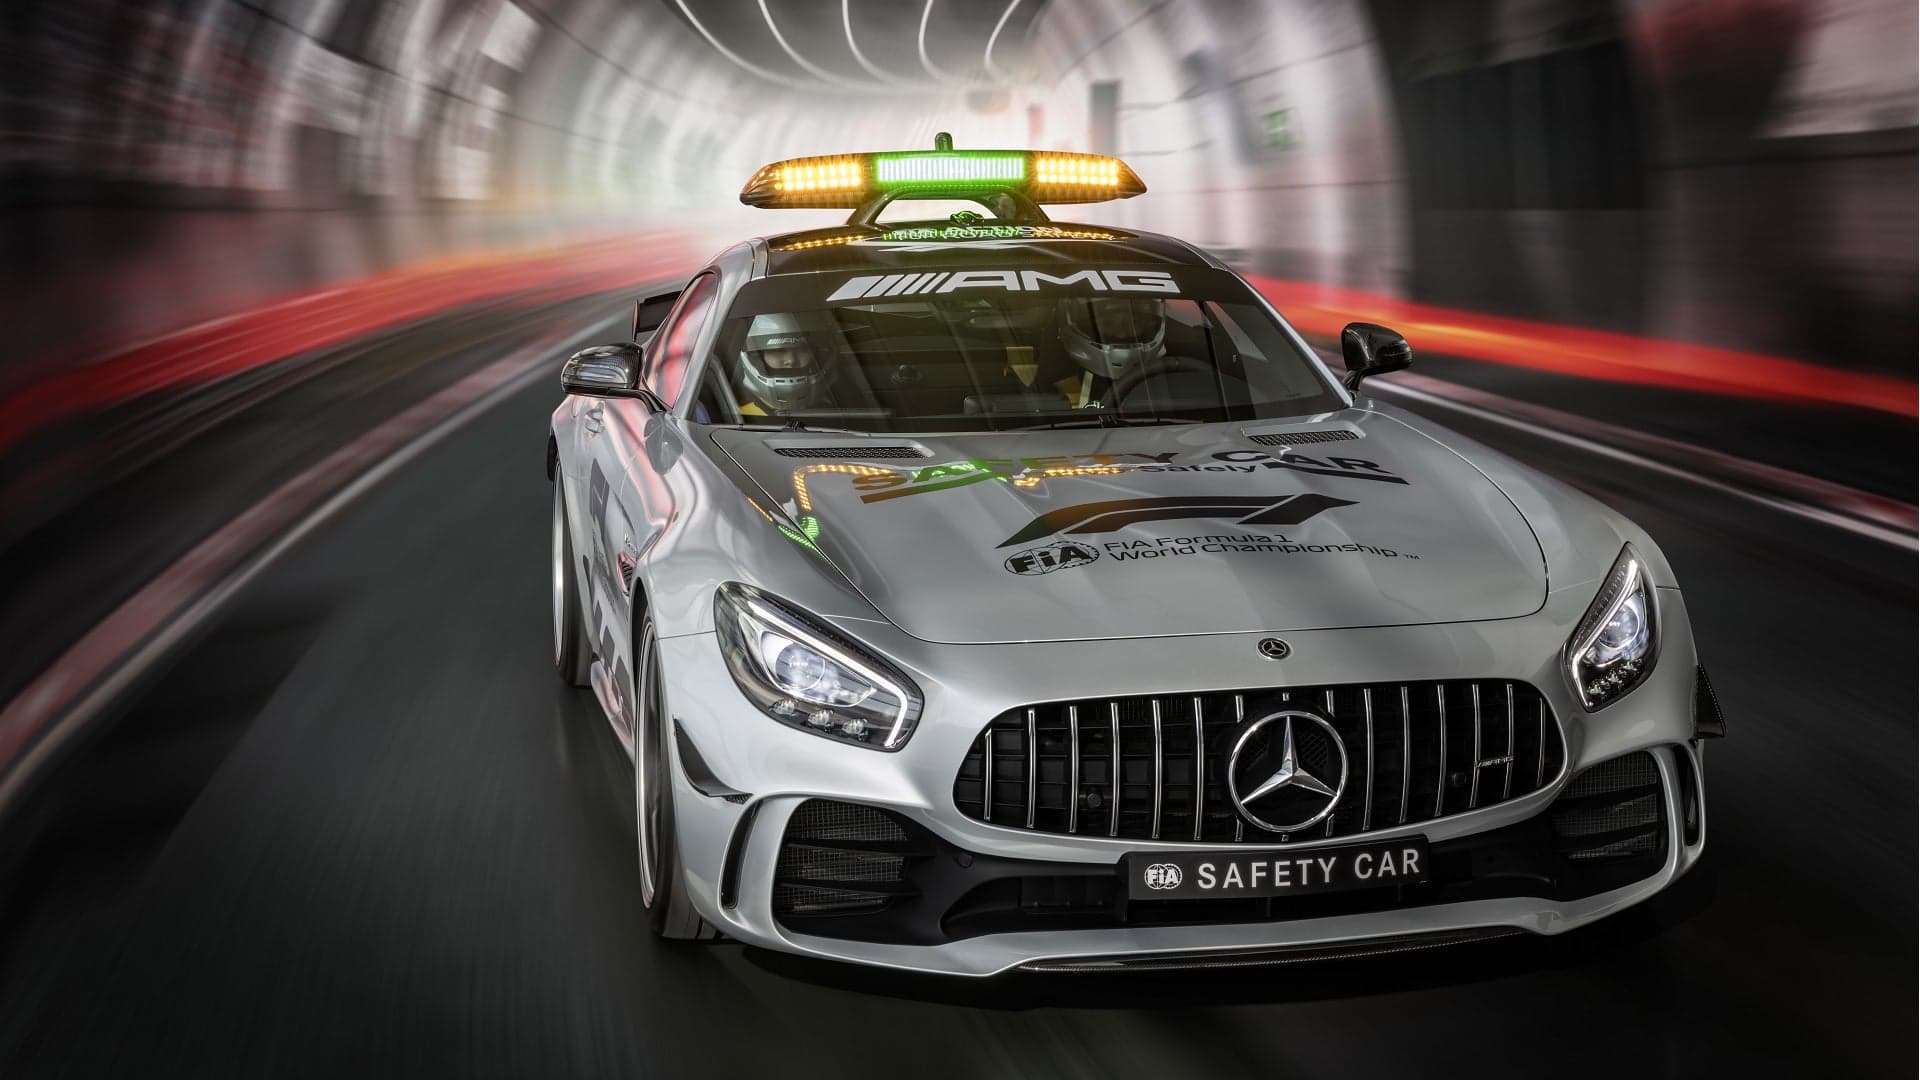 Check out the AMG GT R Formula 1 Pace Car